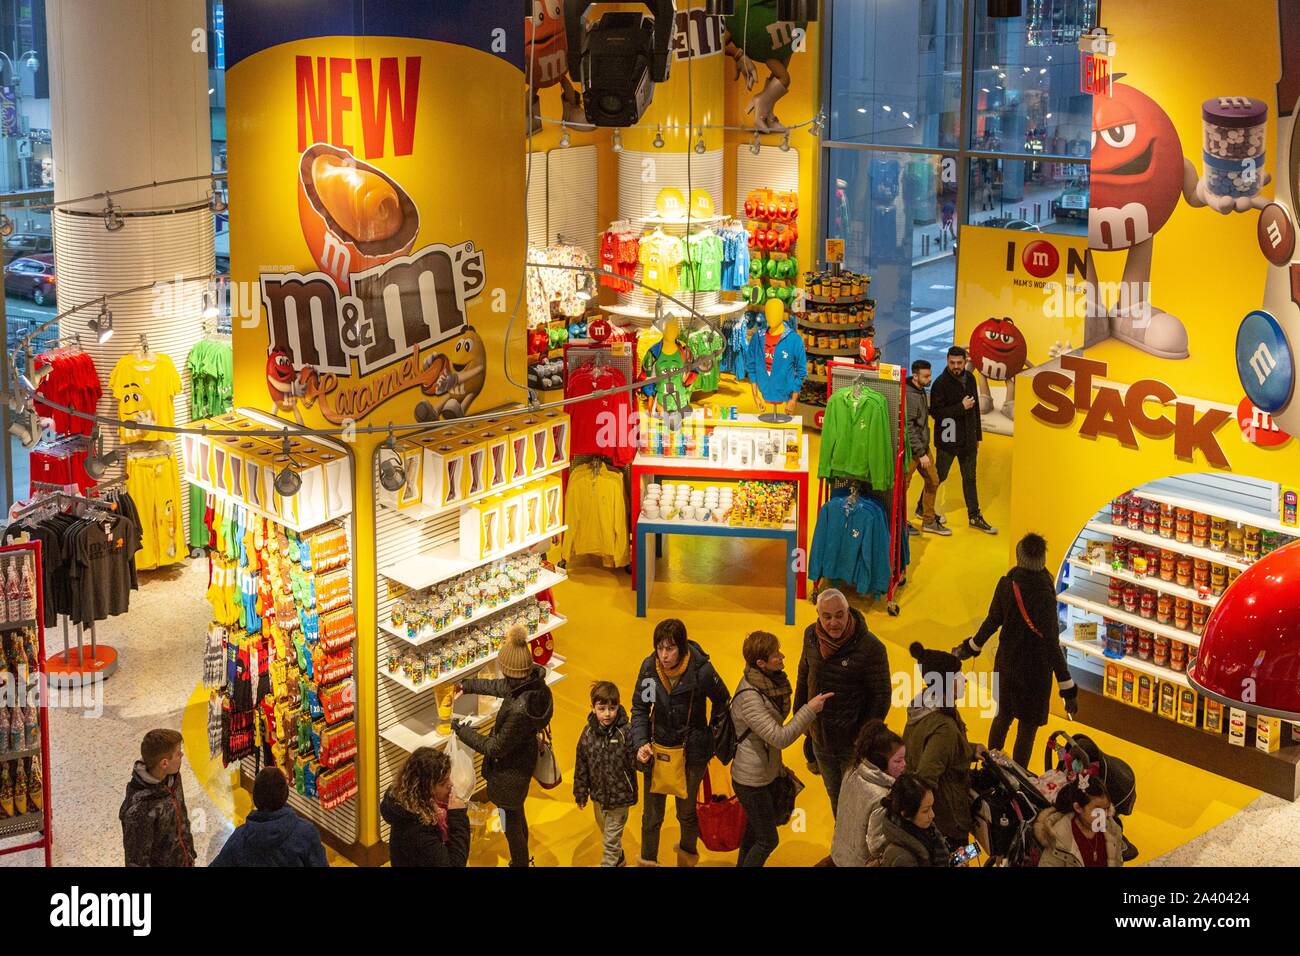 Les M&M'S STORE, TIMES SQUARE, Manhattan, New York, UNITED STATES, USA Banque D'Images